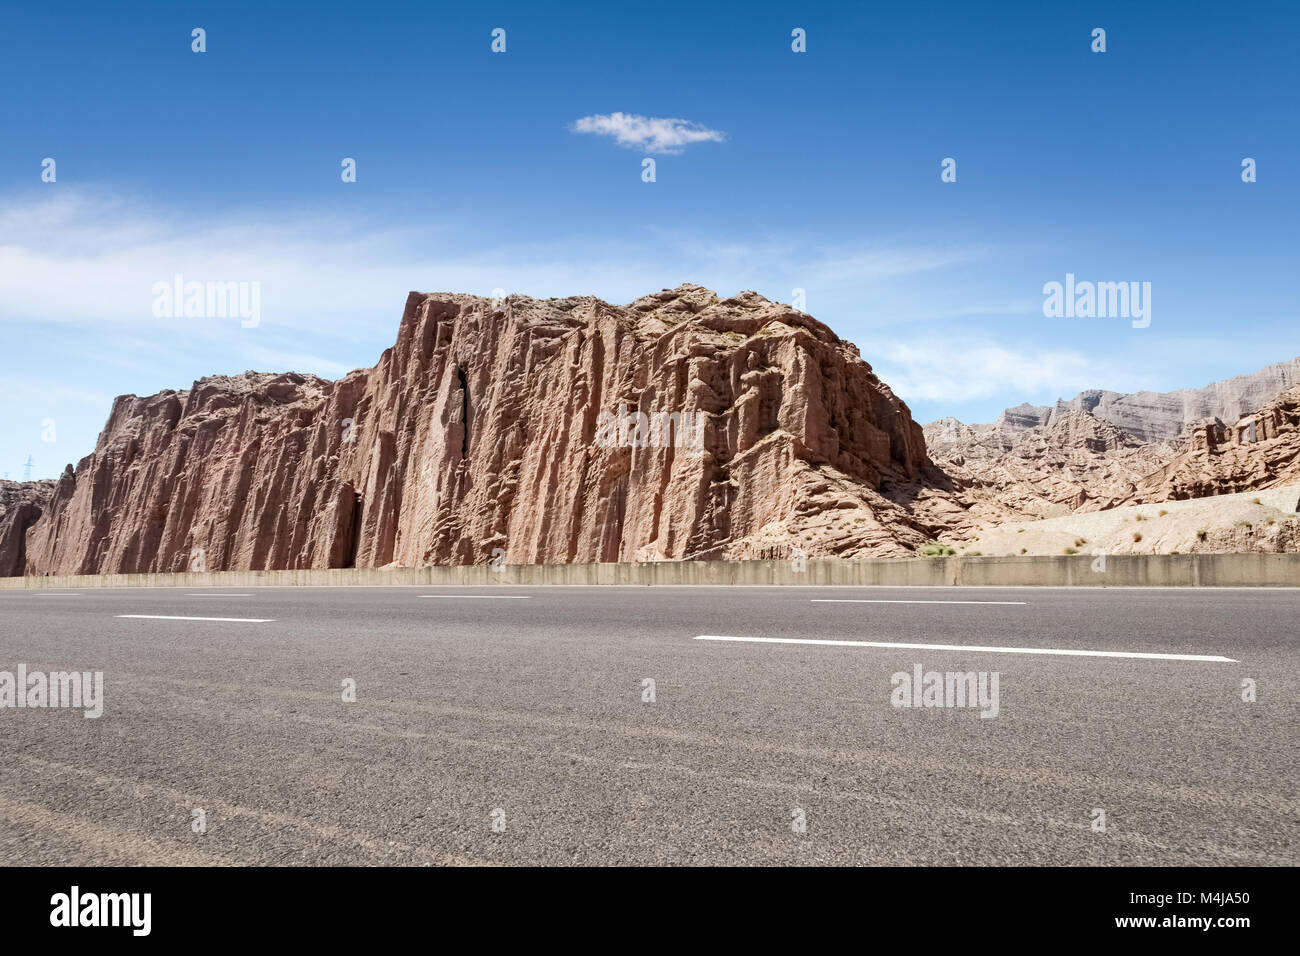 empty asphalt road with xinjiang geological landscape Stock Photo